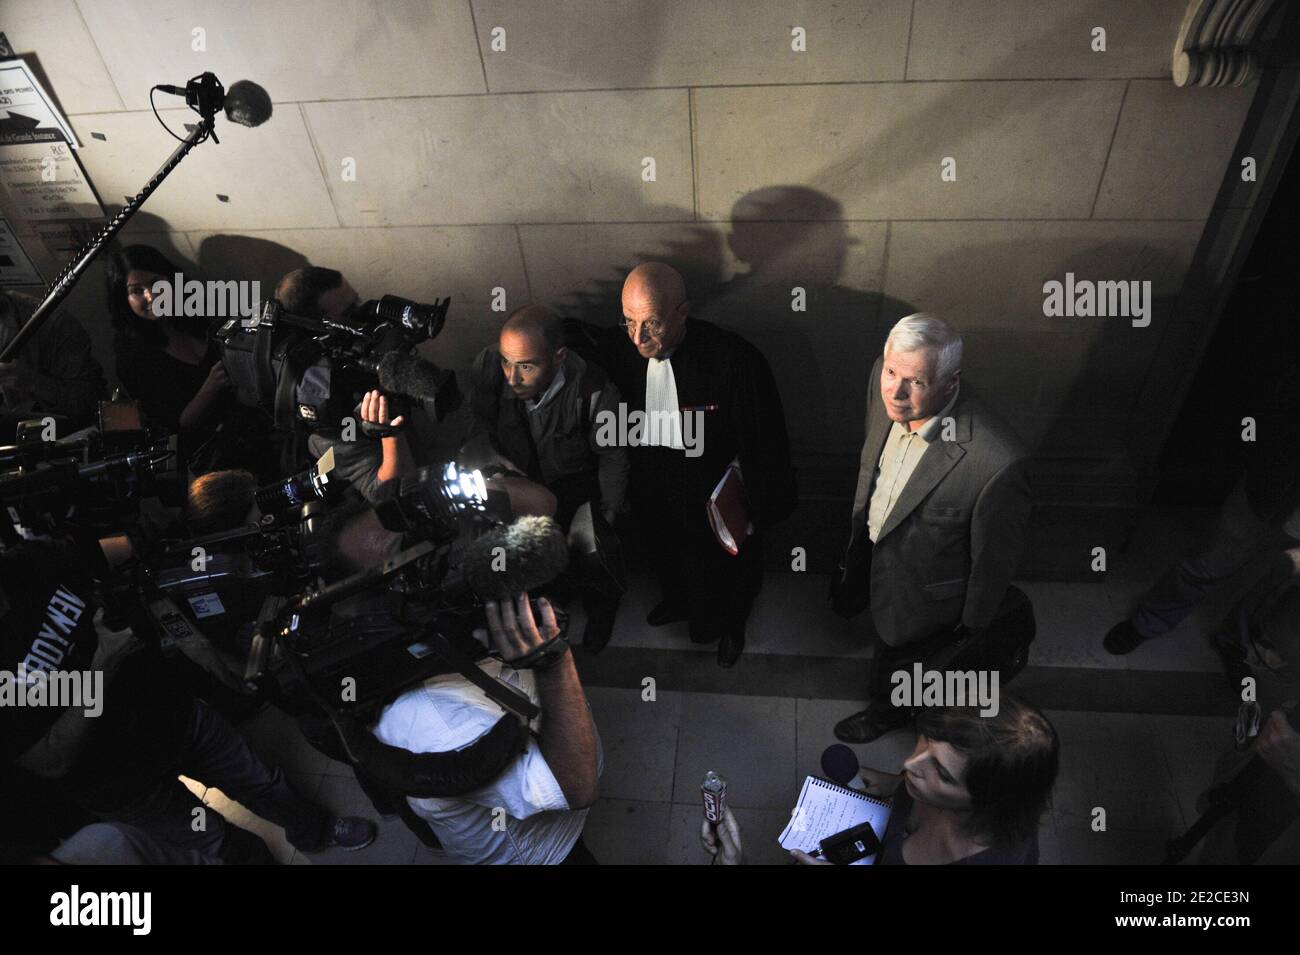 Frenchman Andre Bamberski arrives with his lawyers at the Palais de Justice for German cardiologist Dieter Krombach's trial for the murder of Kalinka Bamberski, in Paris, France on October 4, 2011. The French court today decided to continue the trial of the German doctor, who is accused of having raped and killed his then 14-year-old stepdaughter, Kalinka Bamberski, in the summer of 1982 while she was holidaying with her mother at Krombach's home at Lake Constance, southern Germany. A court in Germany ruled that Krombach could not be held responsible for the death, but in 1995 a court in Paris Stock Photo